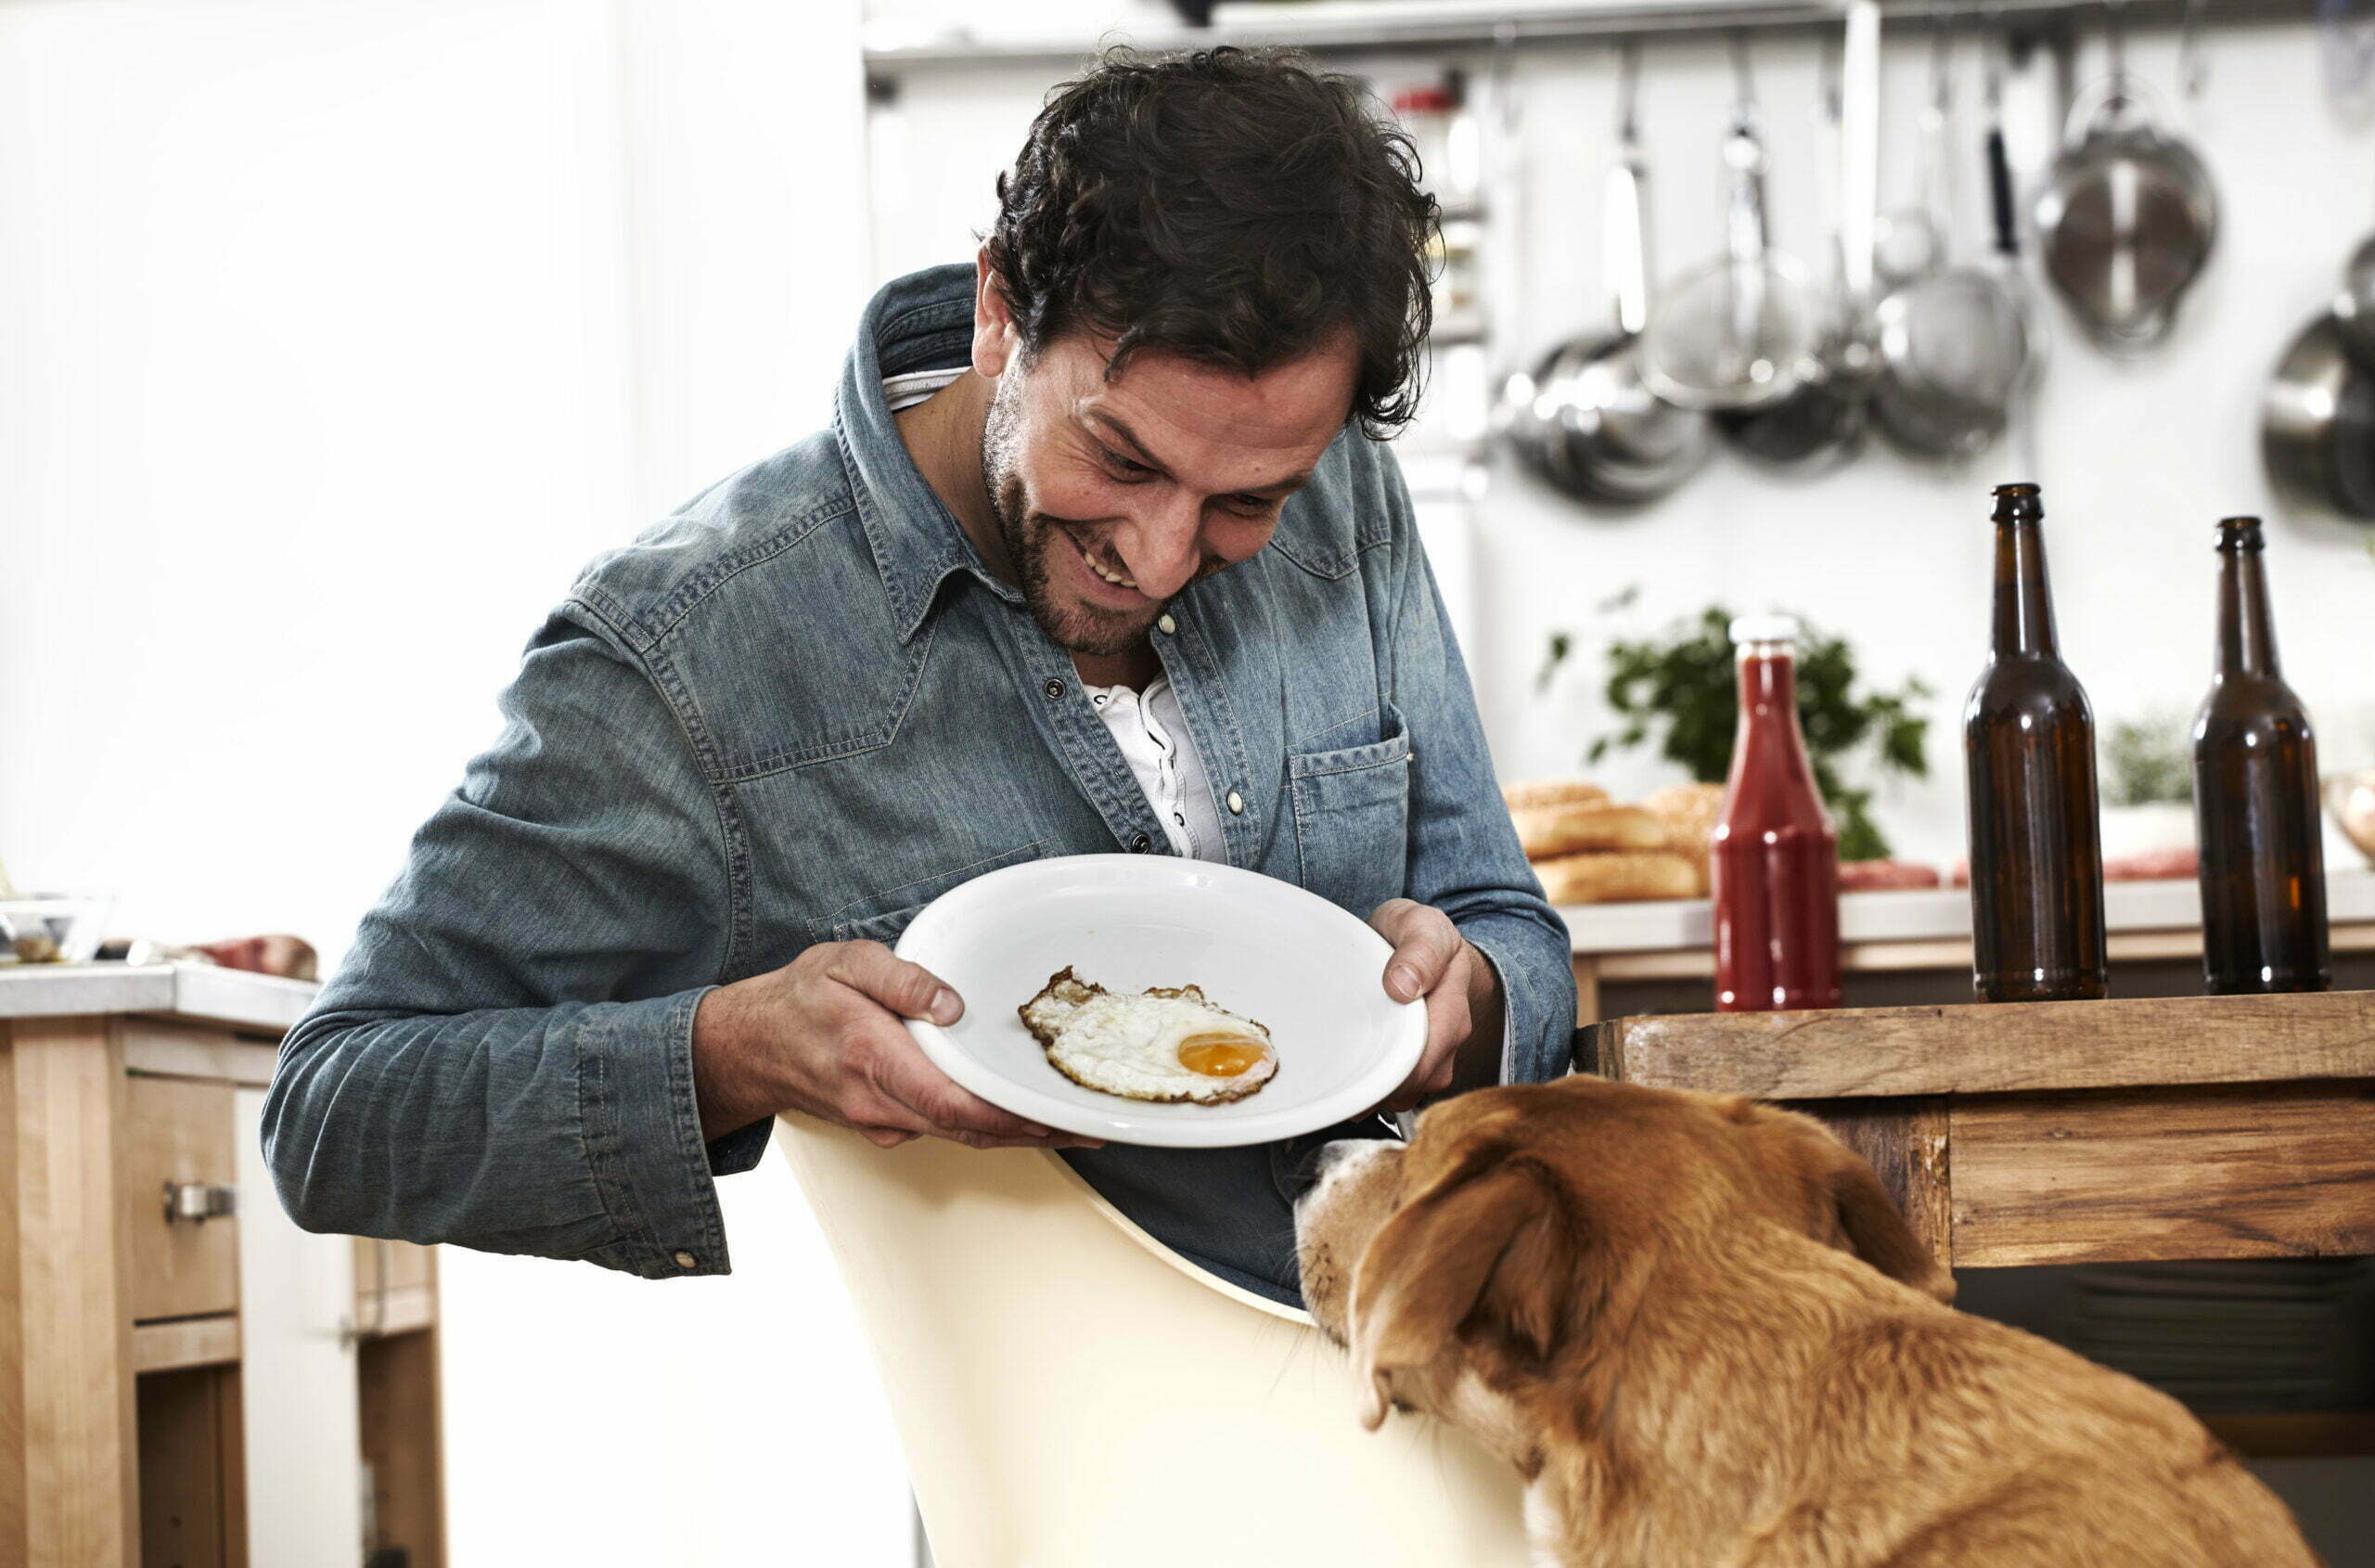 man showing plate with fried egg to dog 2022 12 16 22 27 48 utc